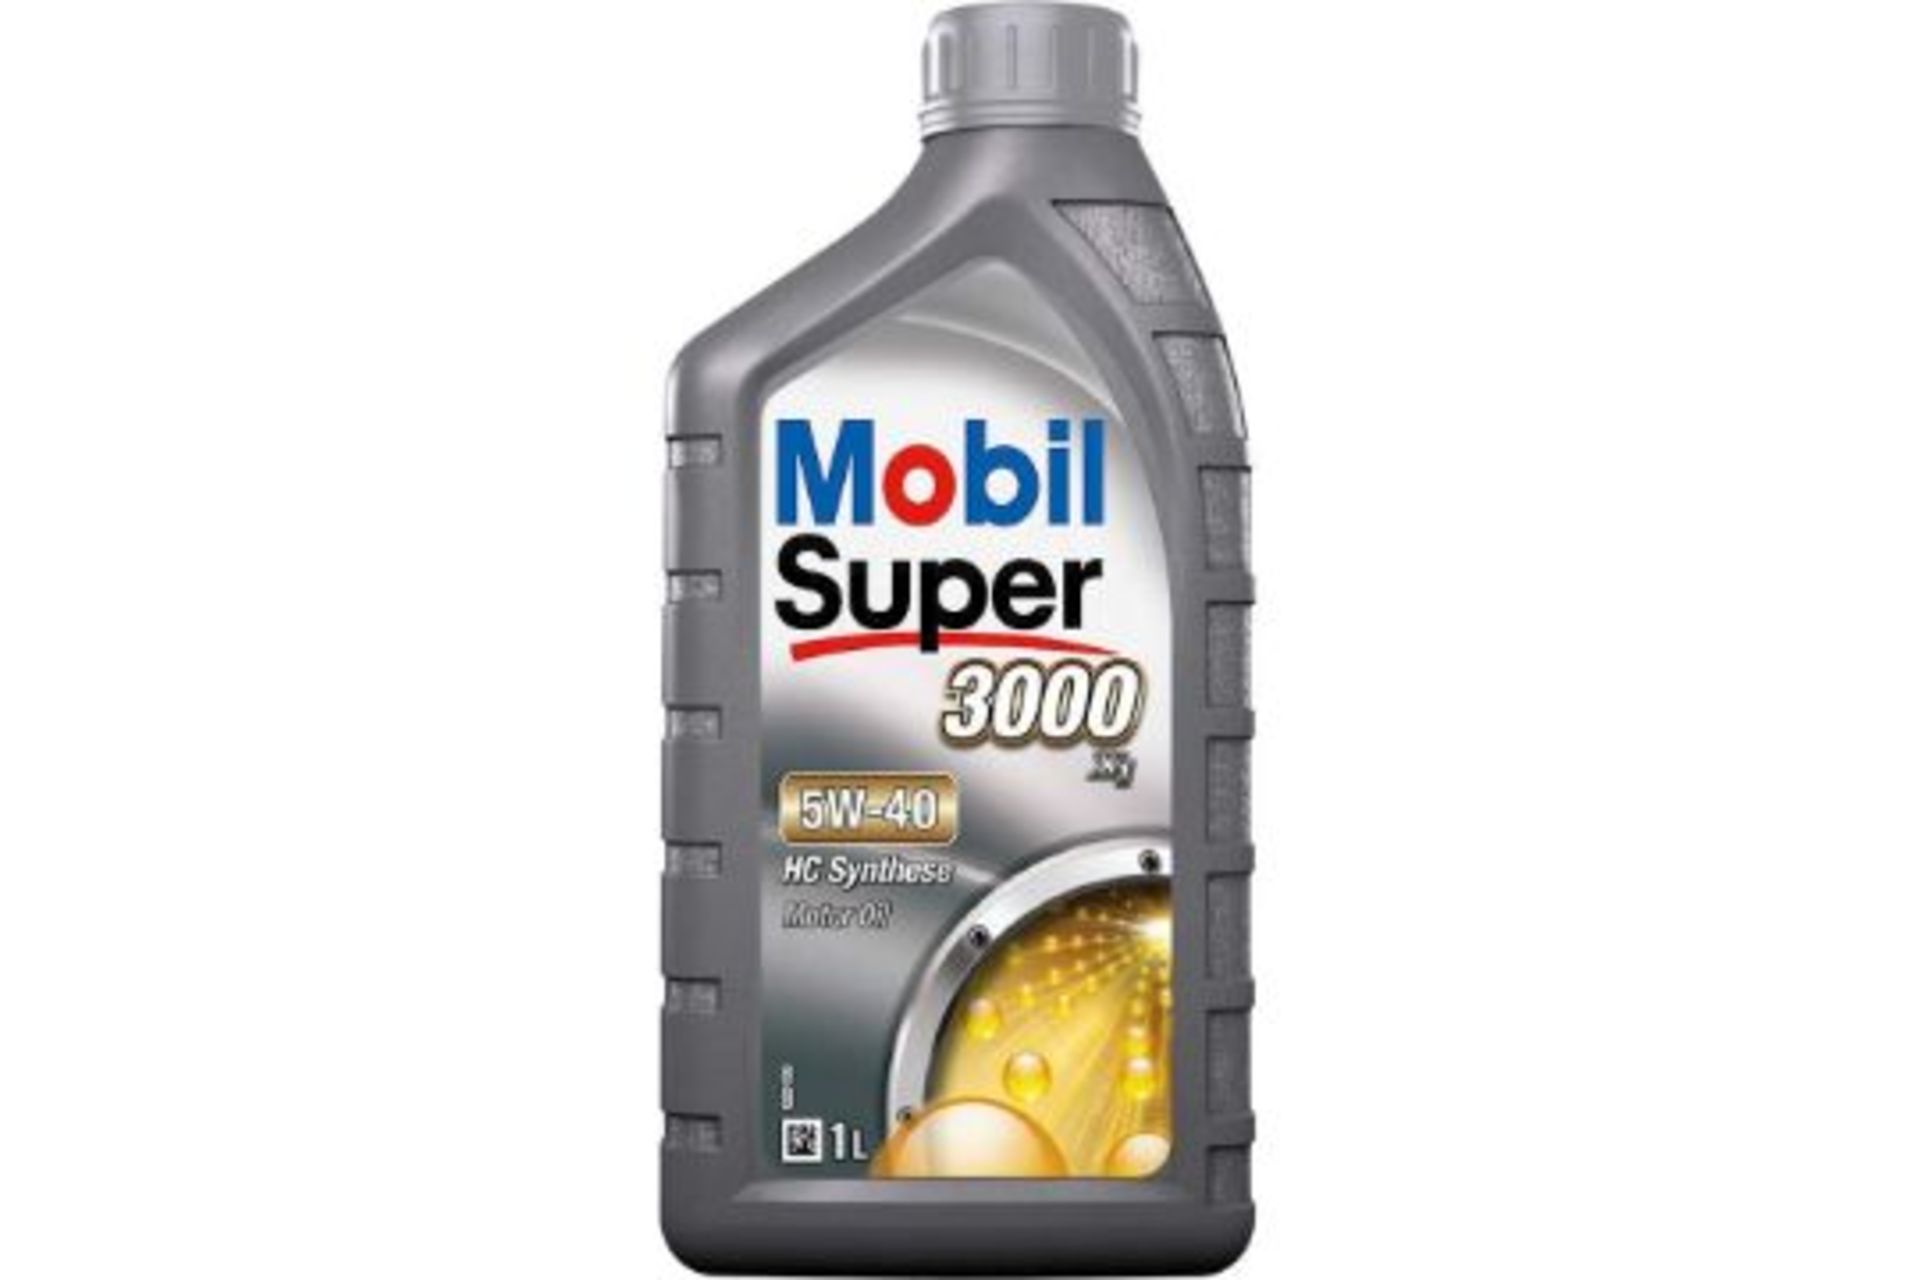 Pallet To Contain 600 x New Sealed Mobil Super 3000 X1 5W-40 Low-Viscosity Engine Oil. 1L. Mobil